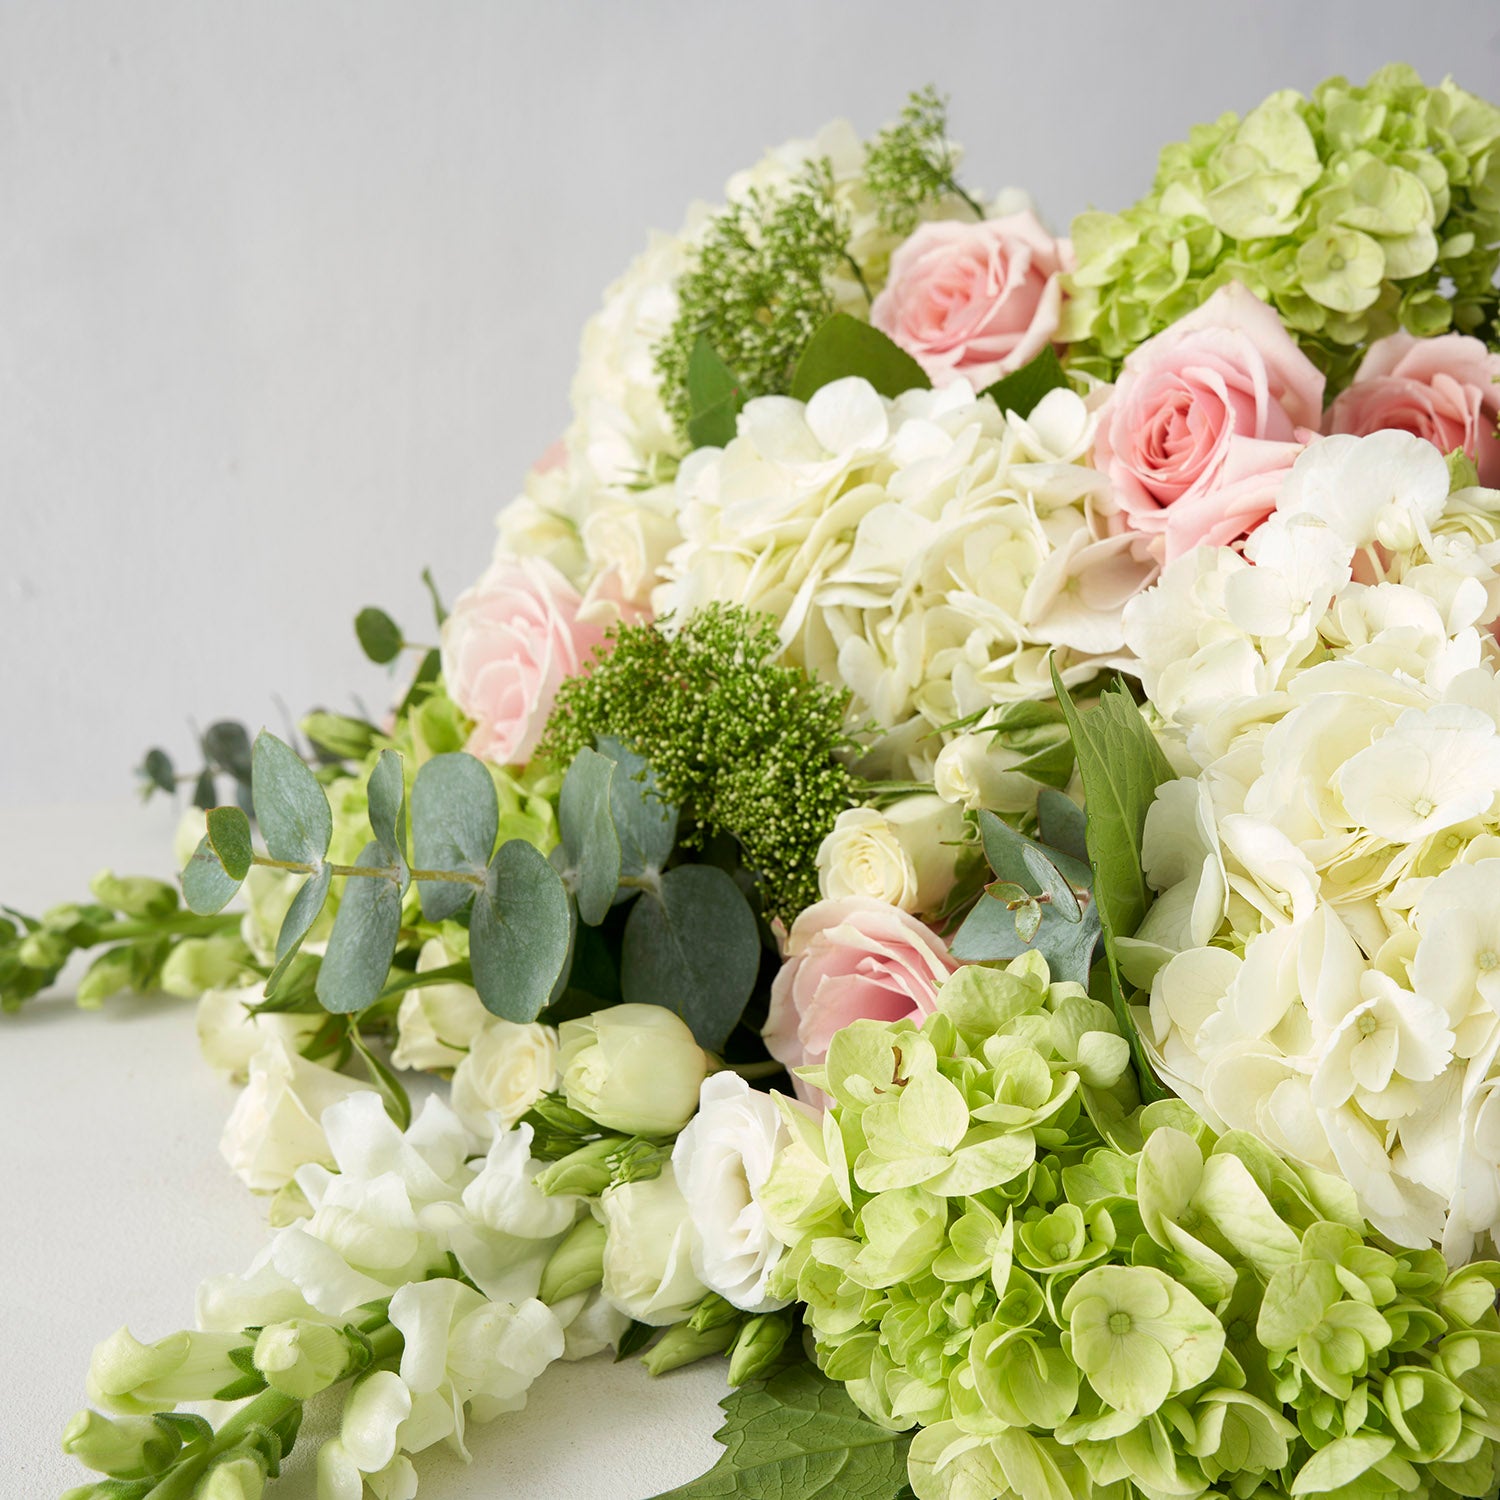 Closeup of green hydangea, white hydrangea, pink roses, Eucalyptus and a veriety of other flowers.